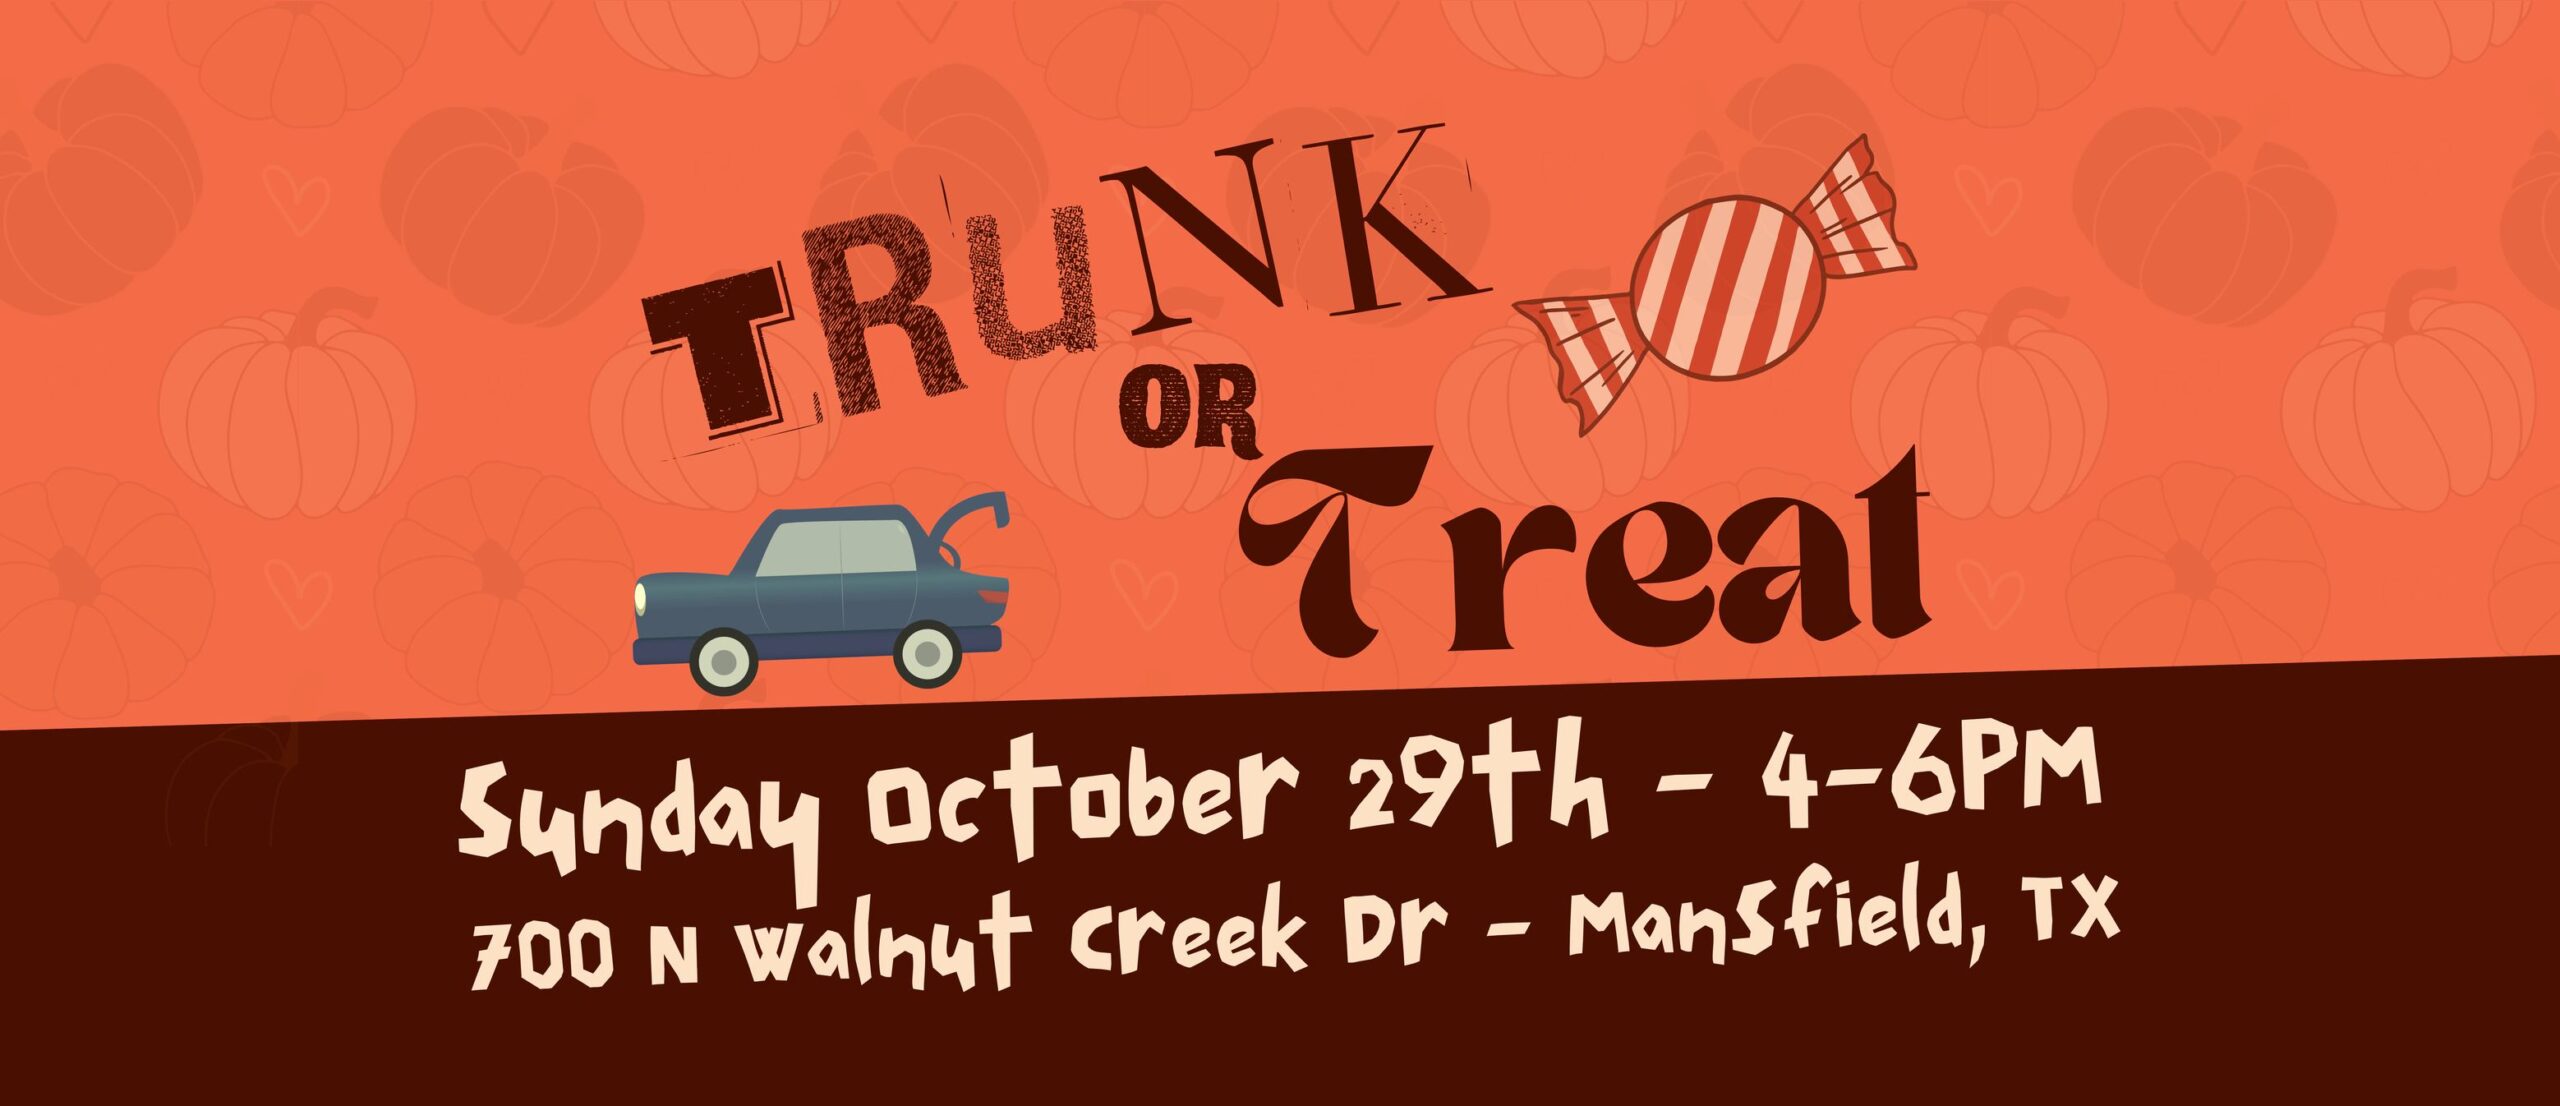 trunk or treat graphic